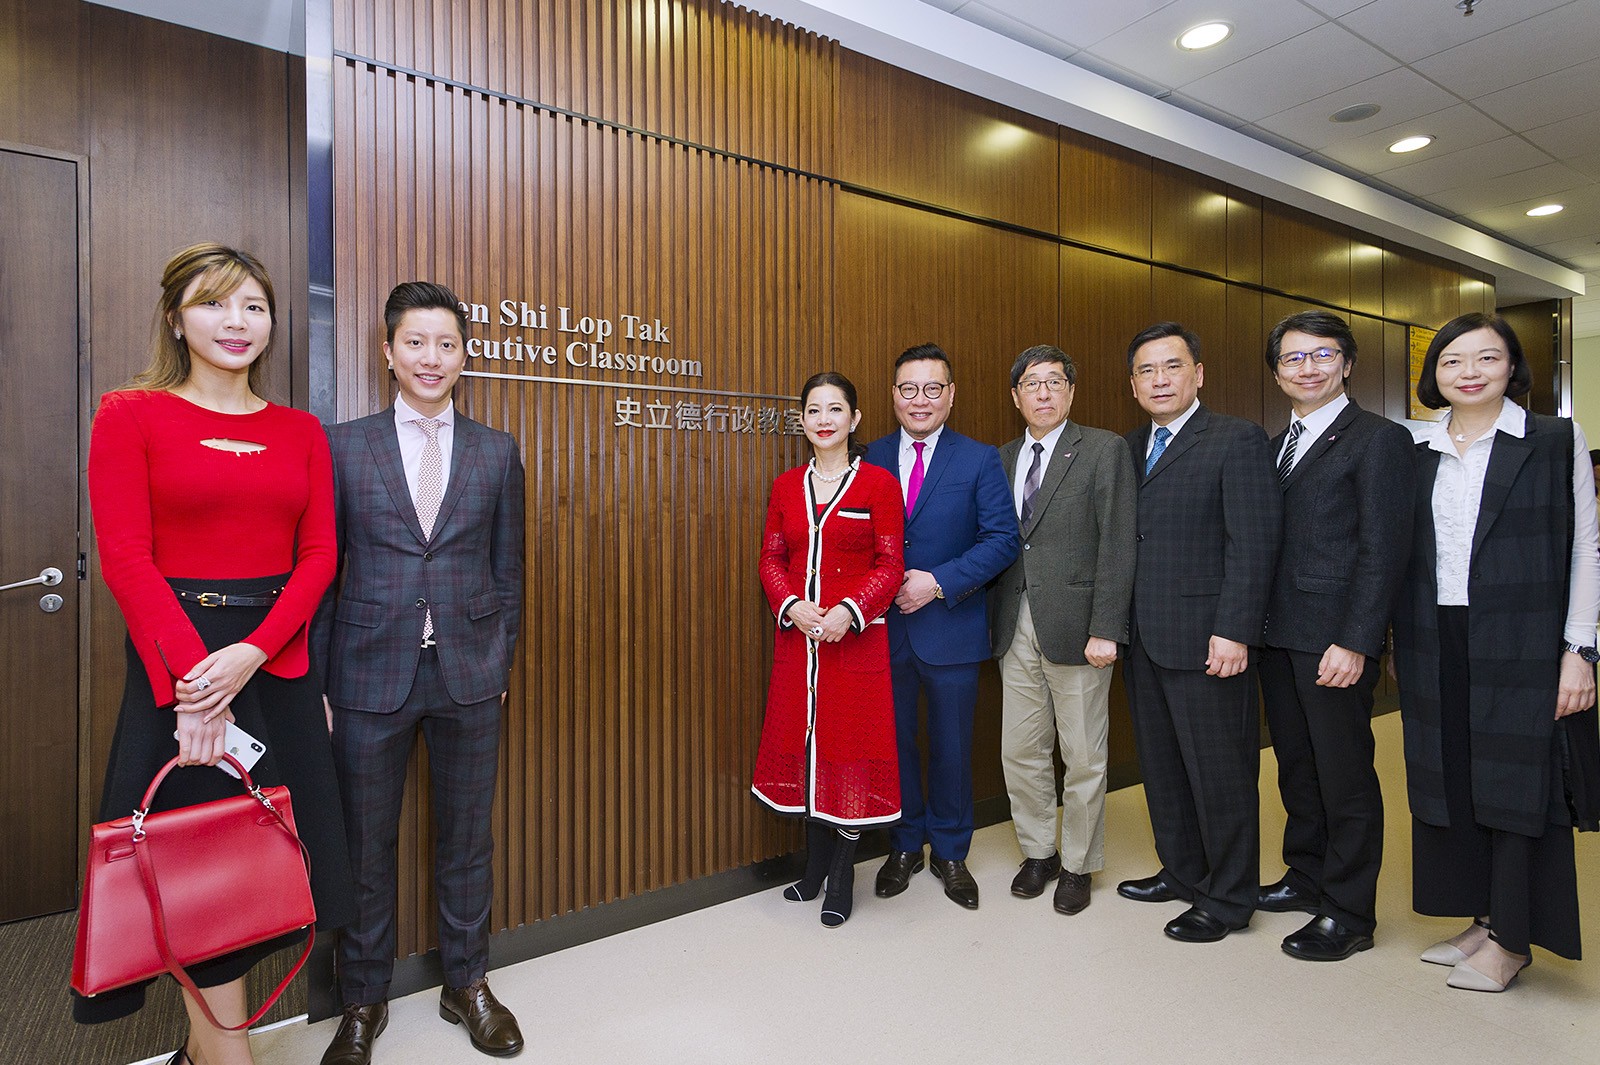 CityU appreciates the contributions of alumnus Dr Shi (5th from right). 